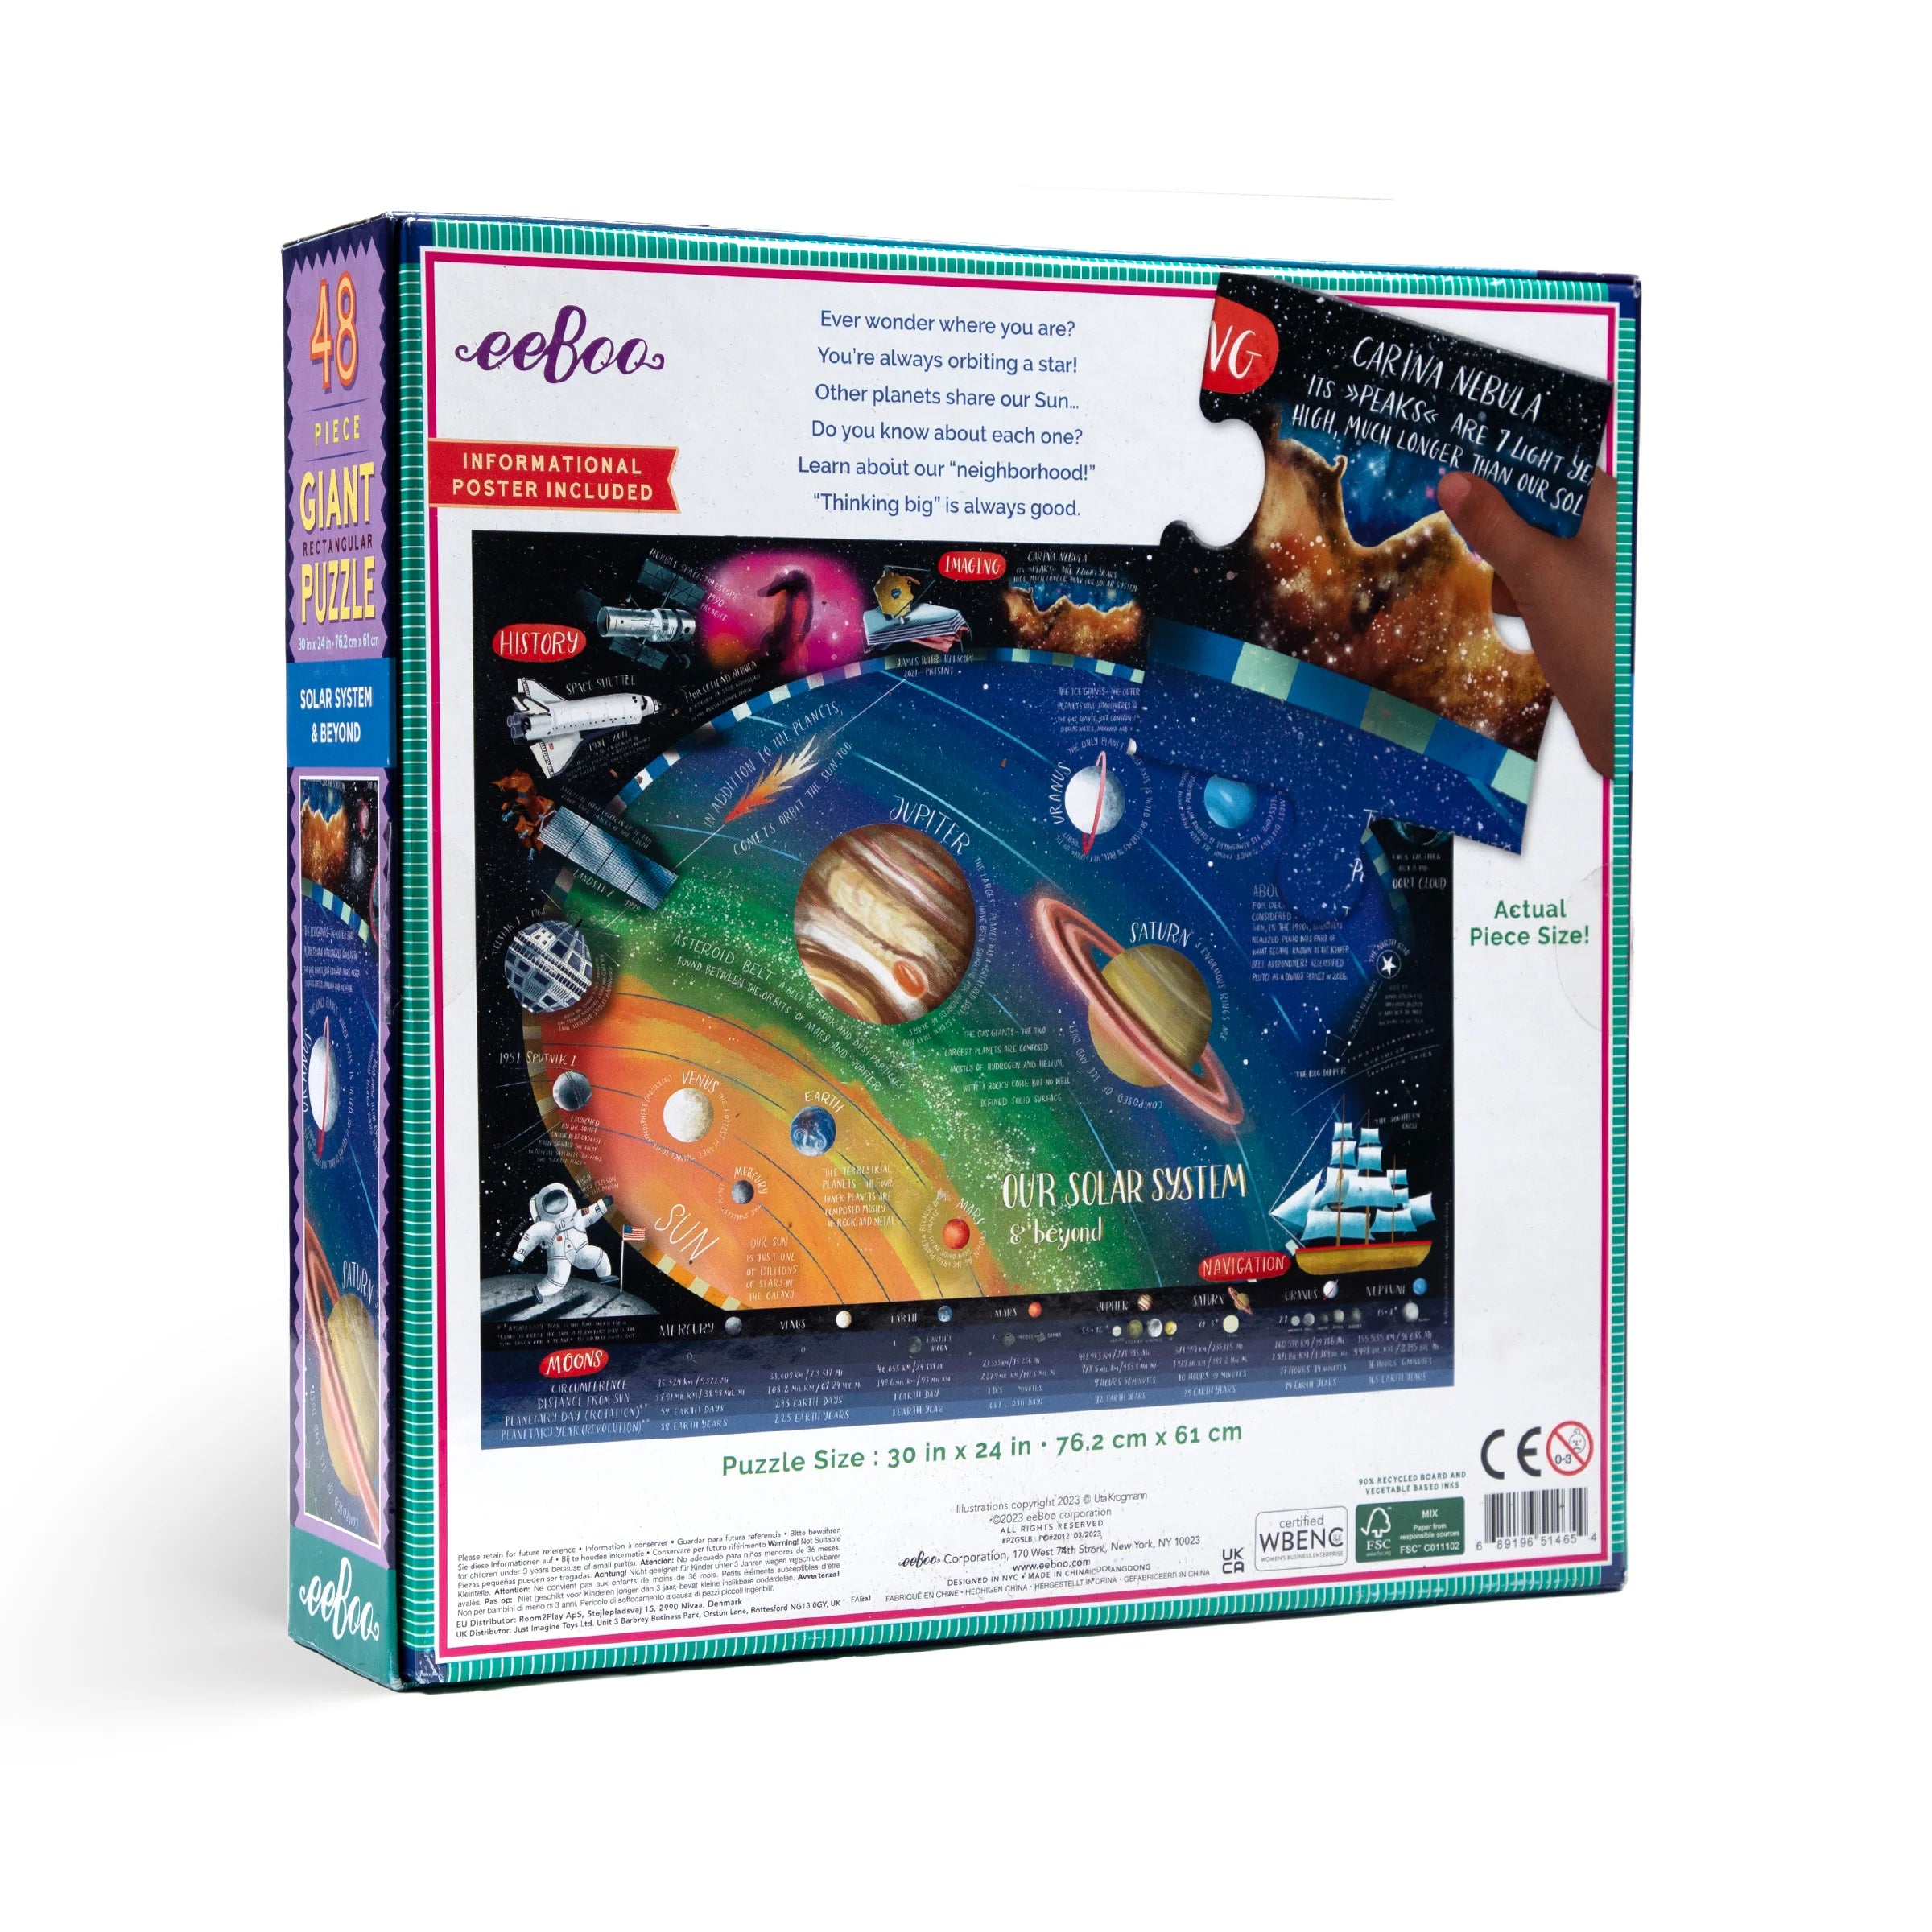 Solar System & Beyond 48 Pc Giant Puzzle